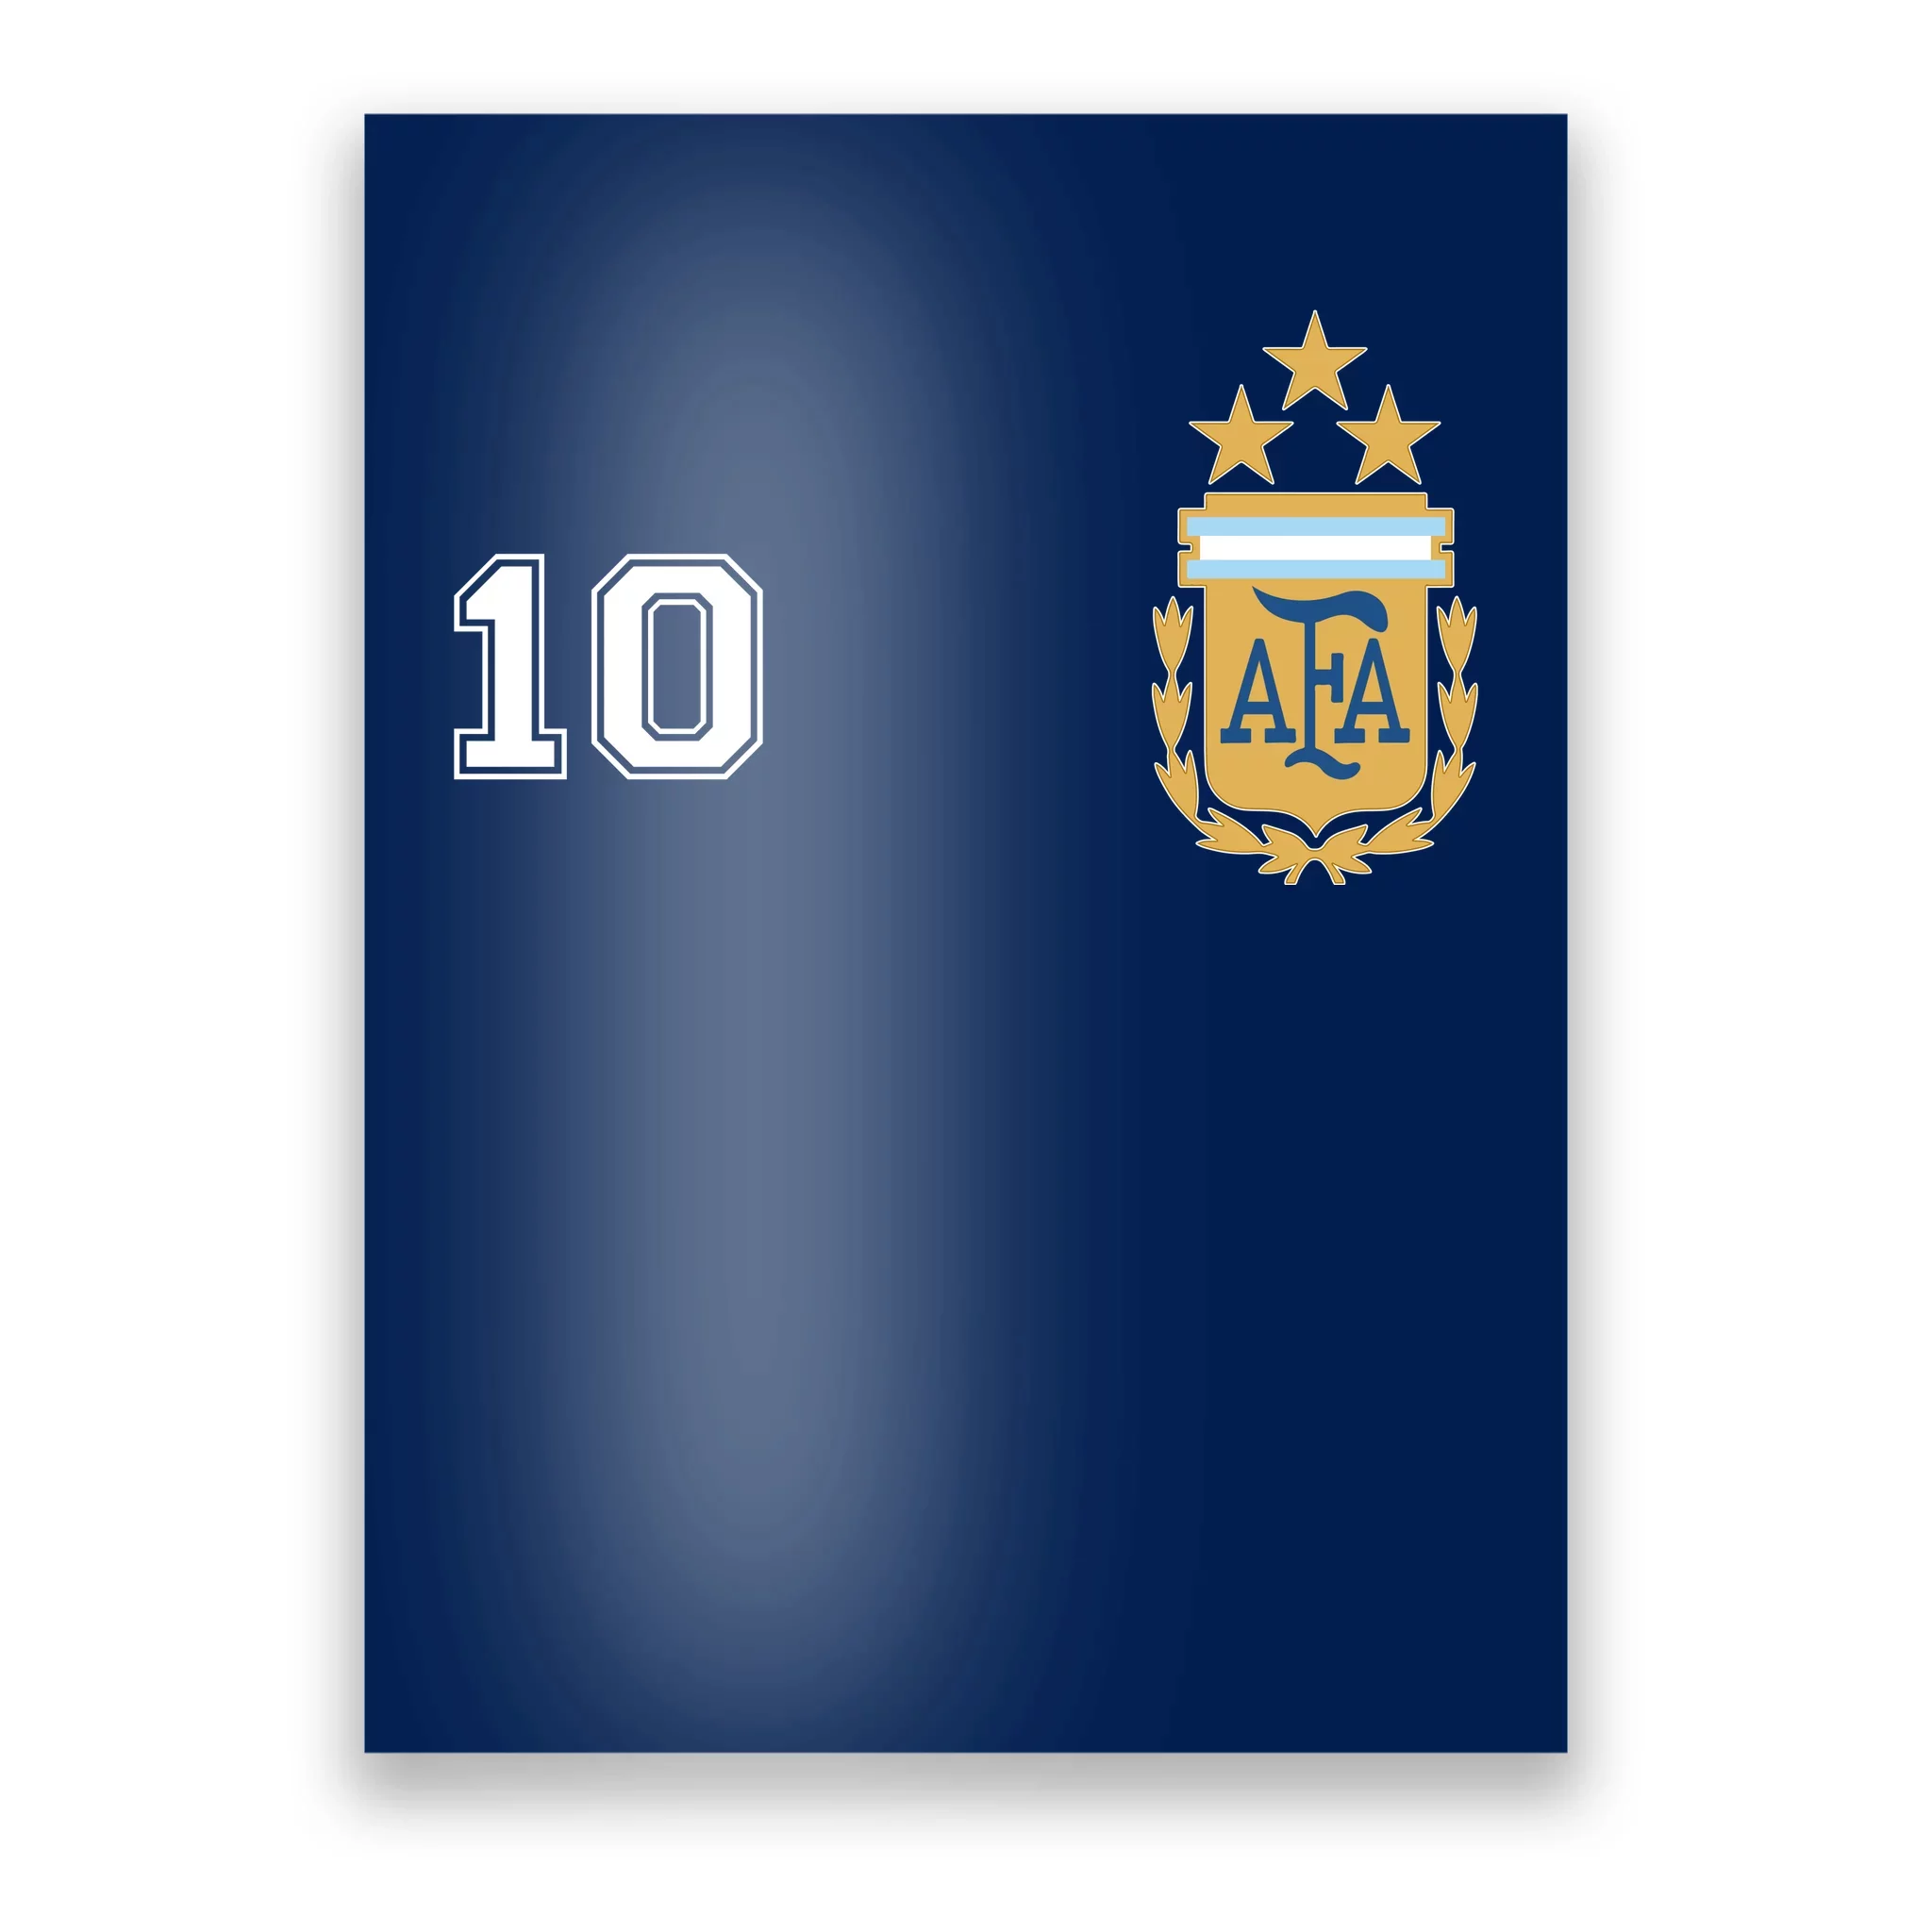 1440x2960 Argentina National Football Team Samsung Galaxy Note 9,8,  S9,S8,S8+ QHD ,HD 4k Wallpapers,Images,Backgrounds,Photos and Pictures